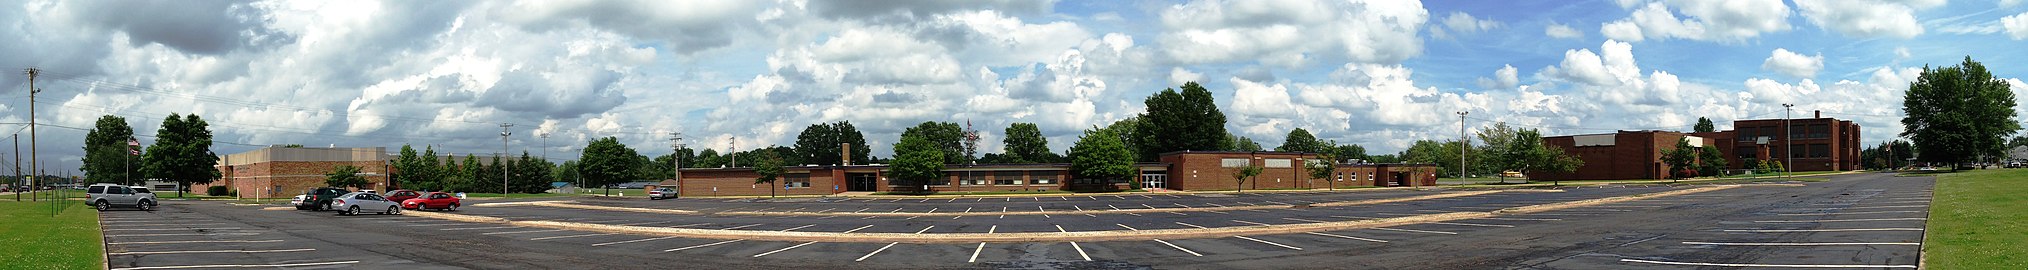 Panorama of Rootstown Local School District facilities, June 2015